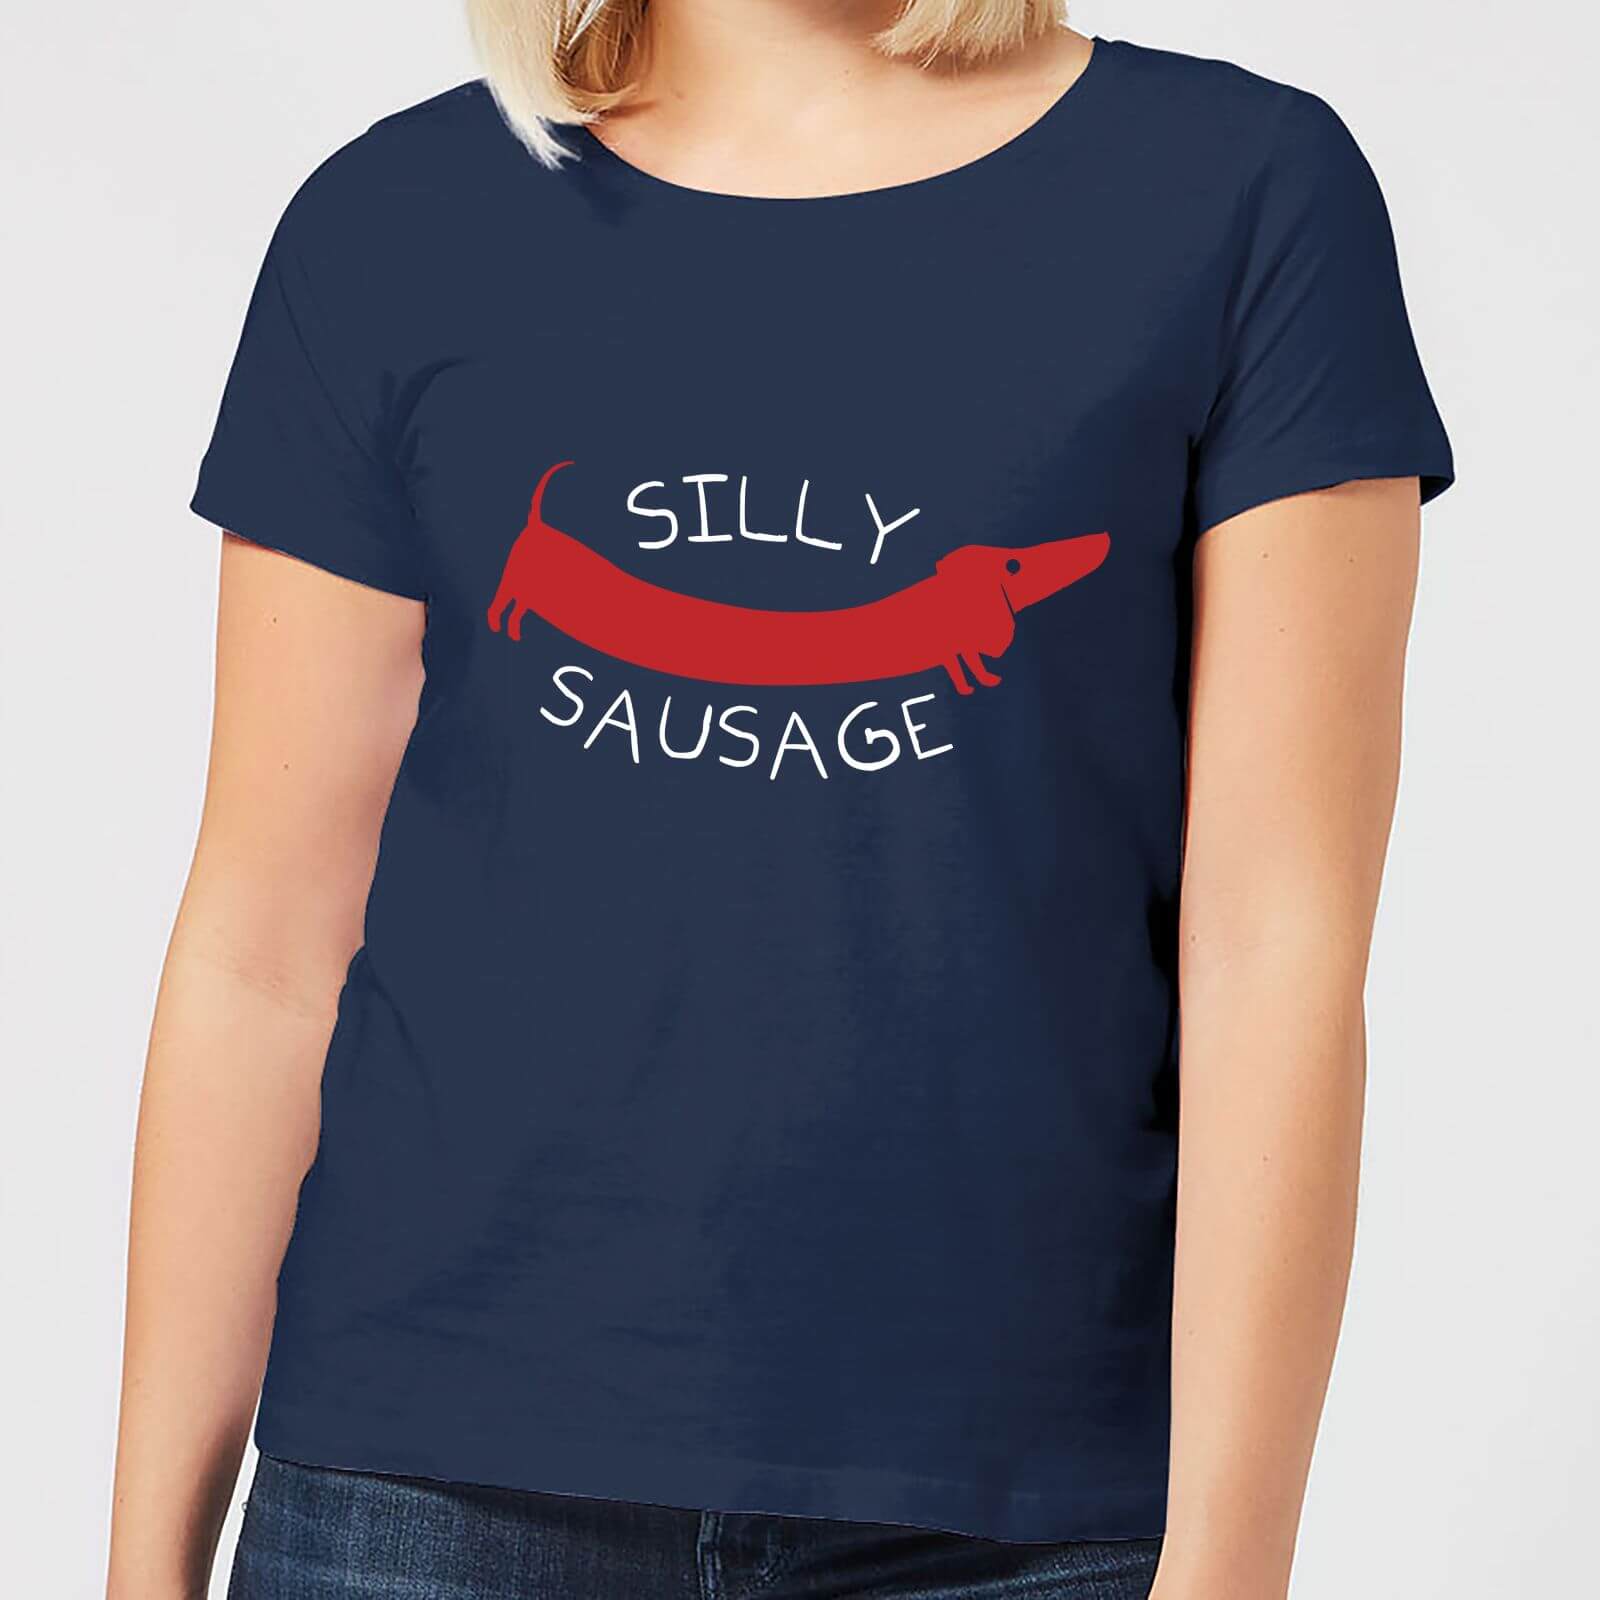 Silly Sausage Women's T-Shirt - Navy - S - Navy